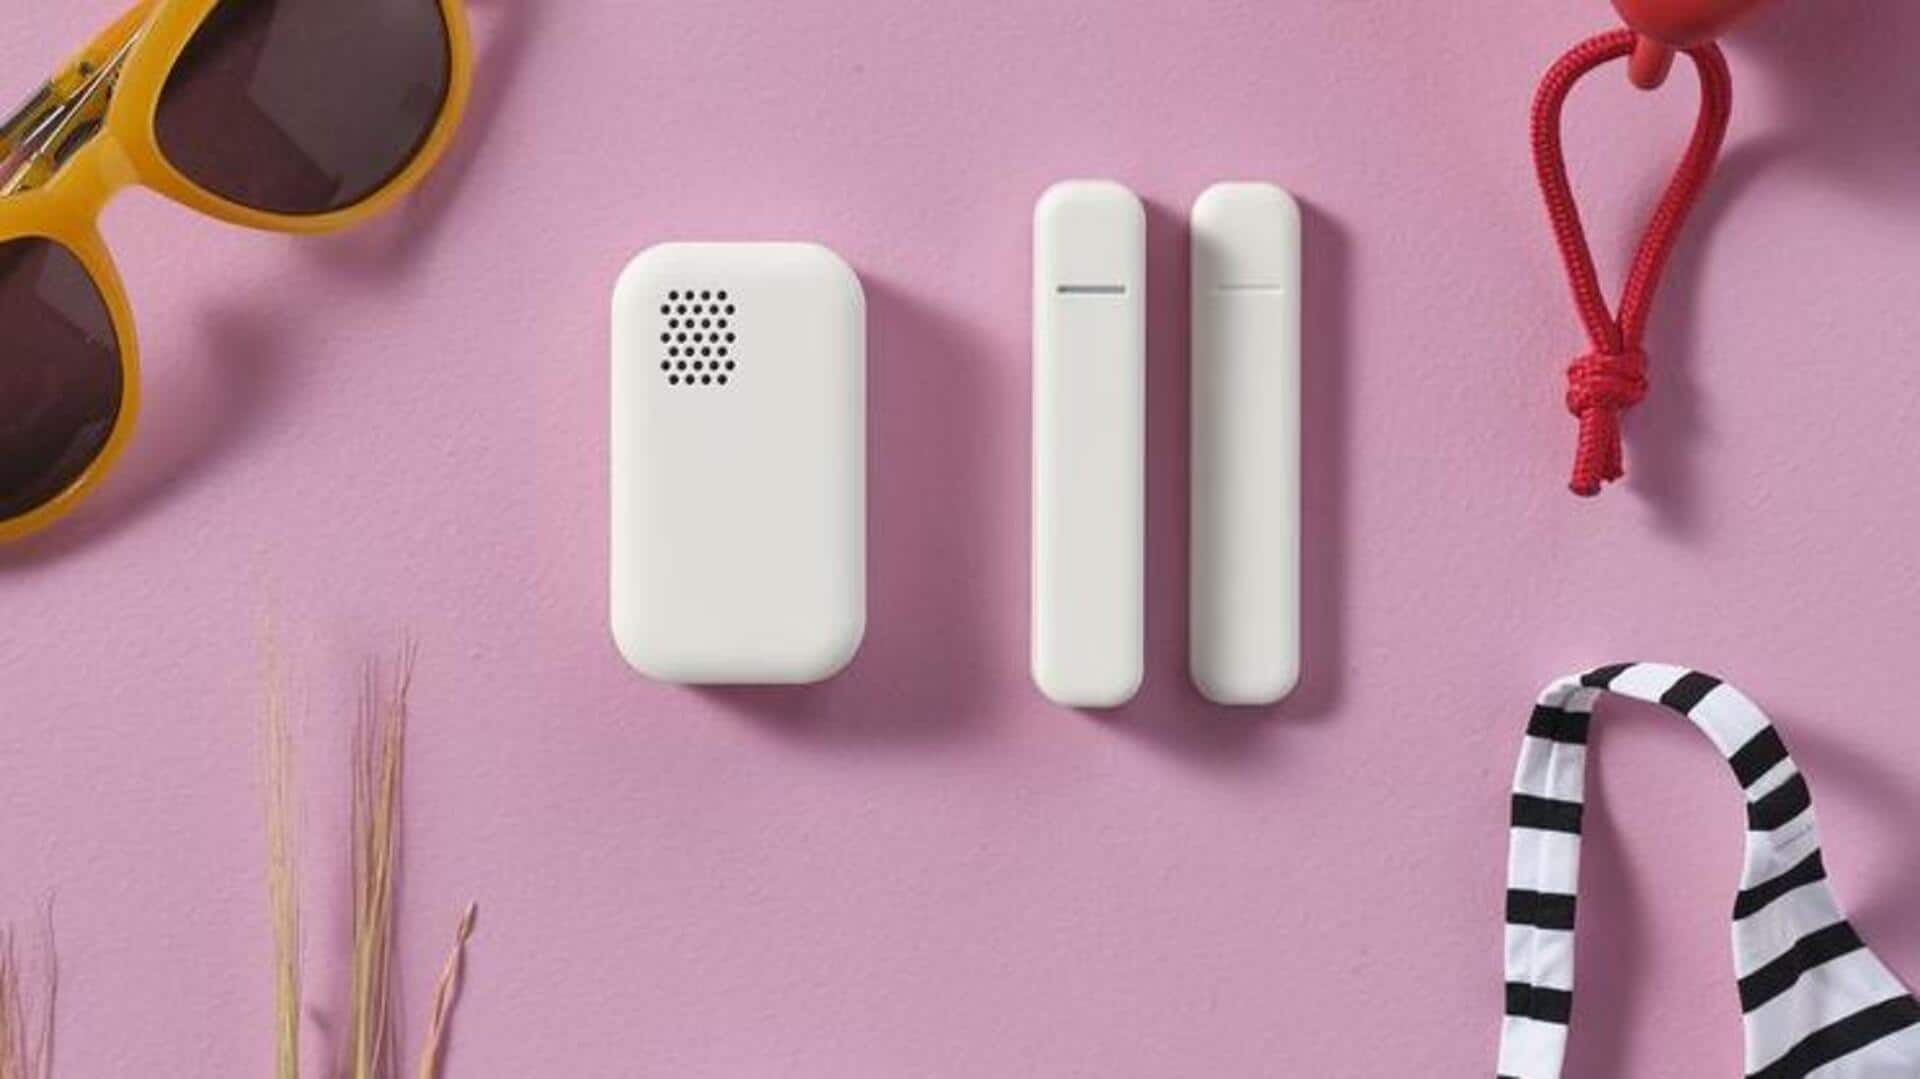 IKEA expands its smart home lineup with three new sensors